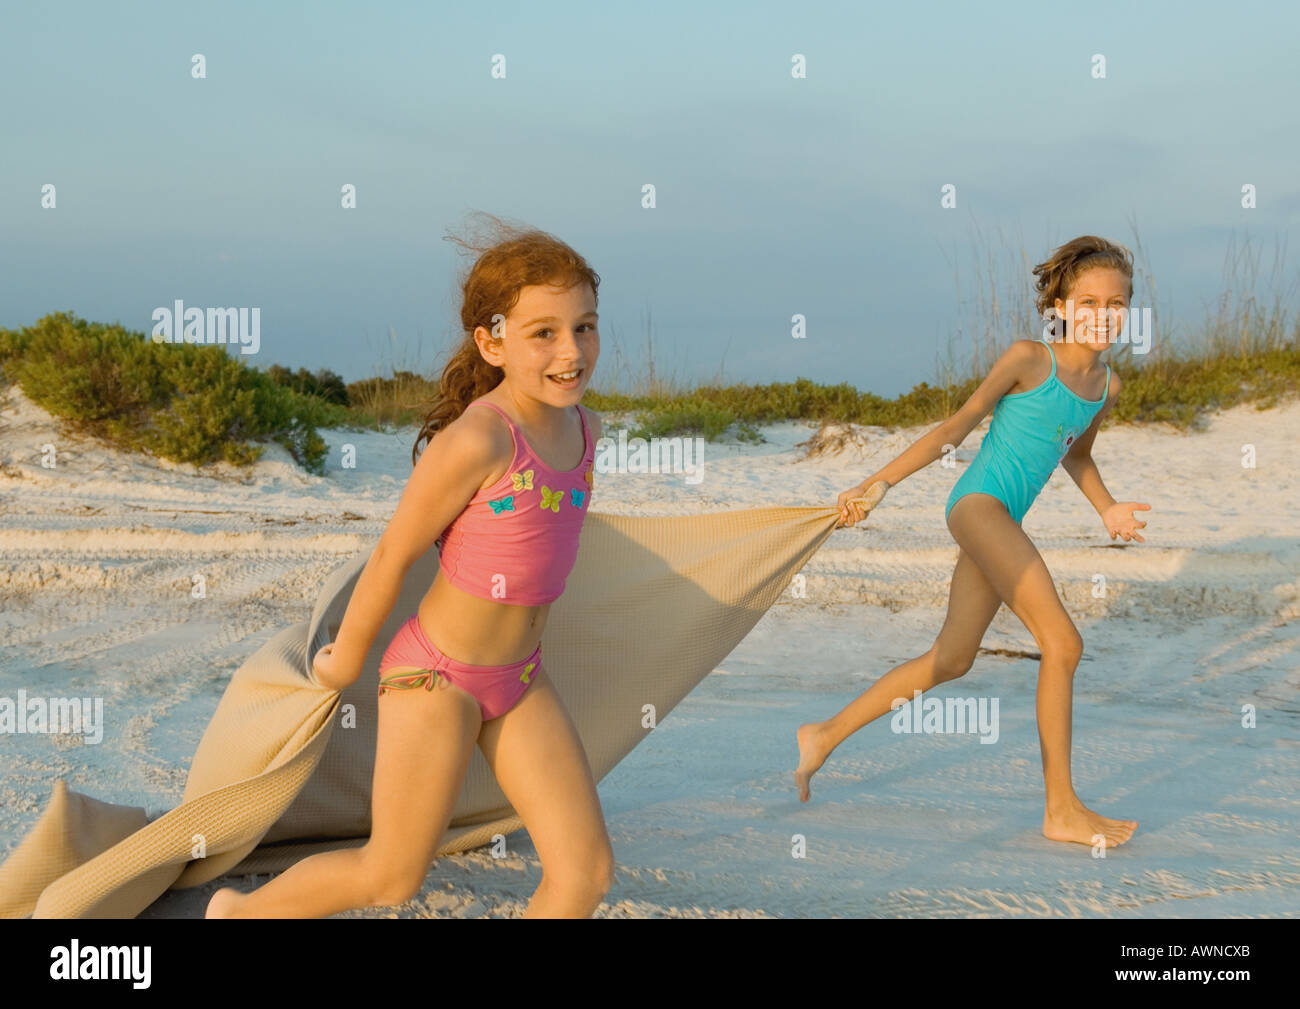 Two Girls Running On Beach Holding Blanket Out In Wind